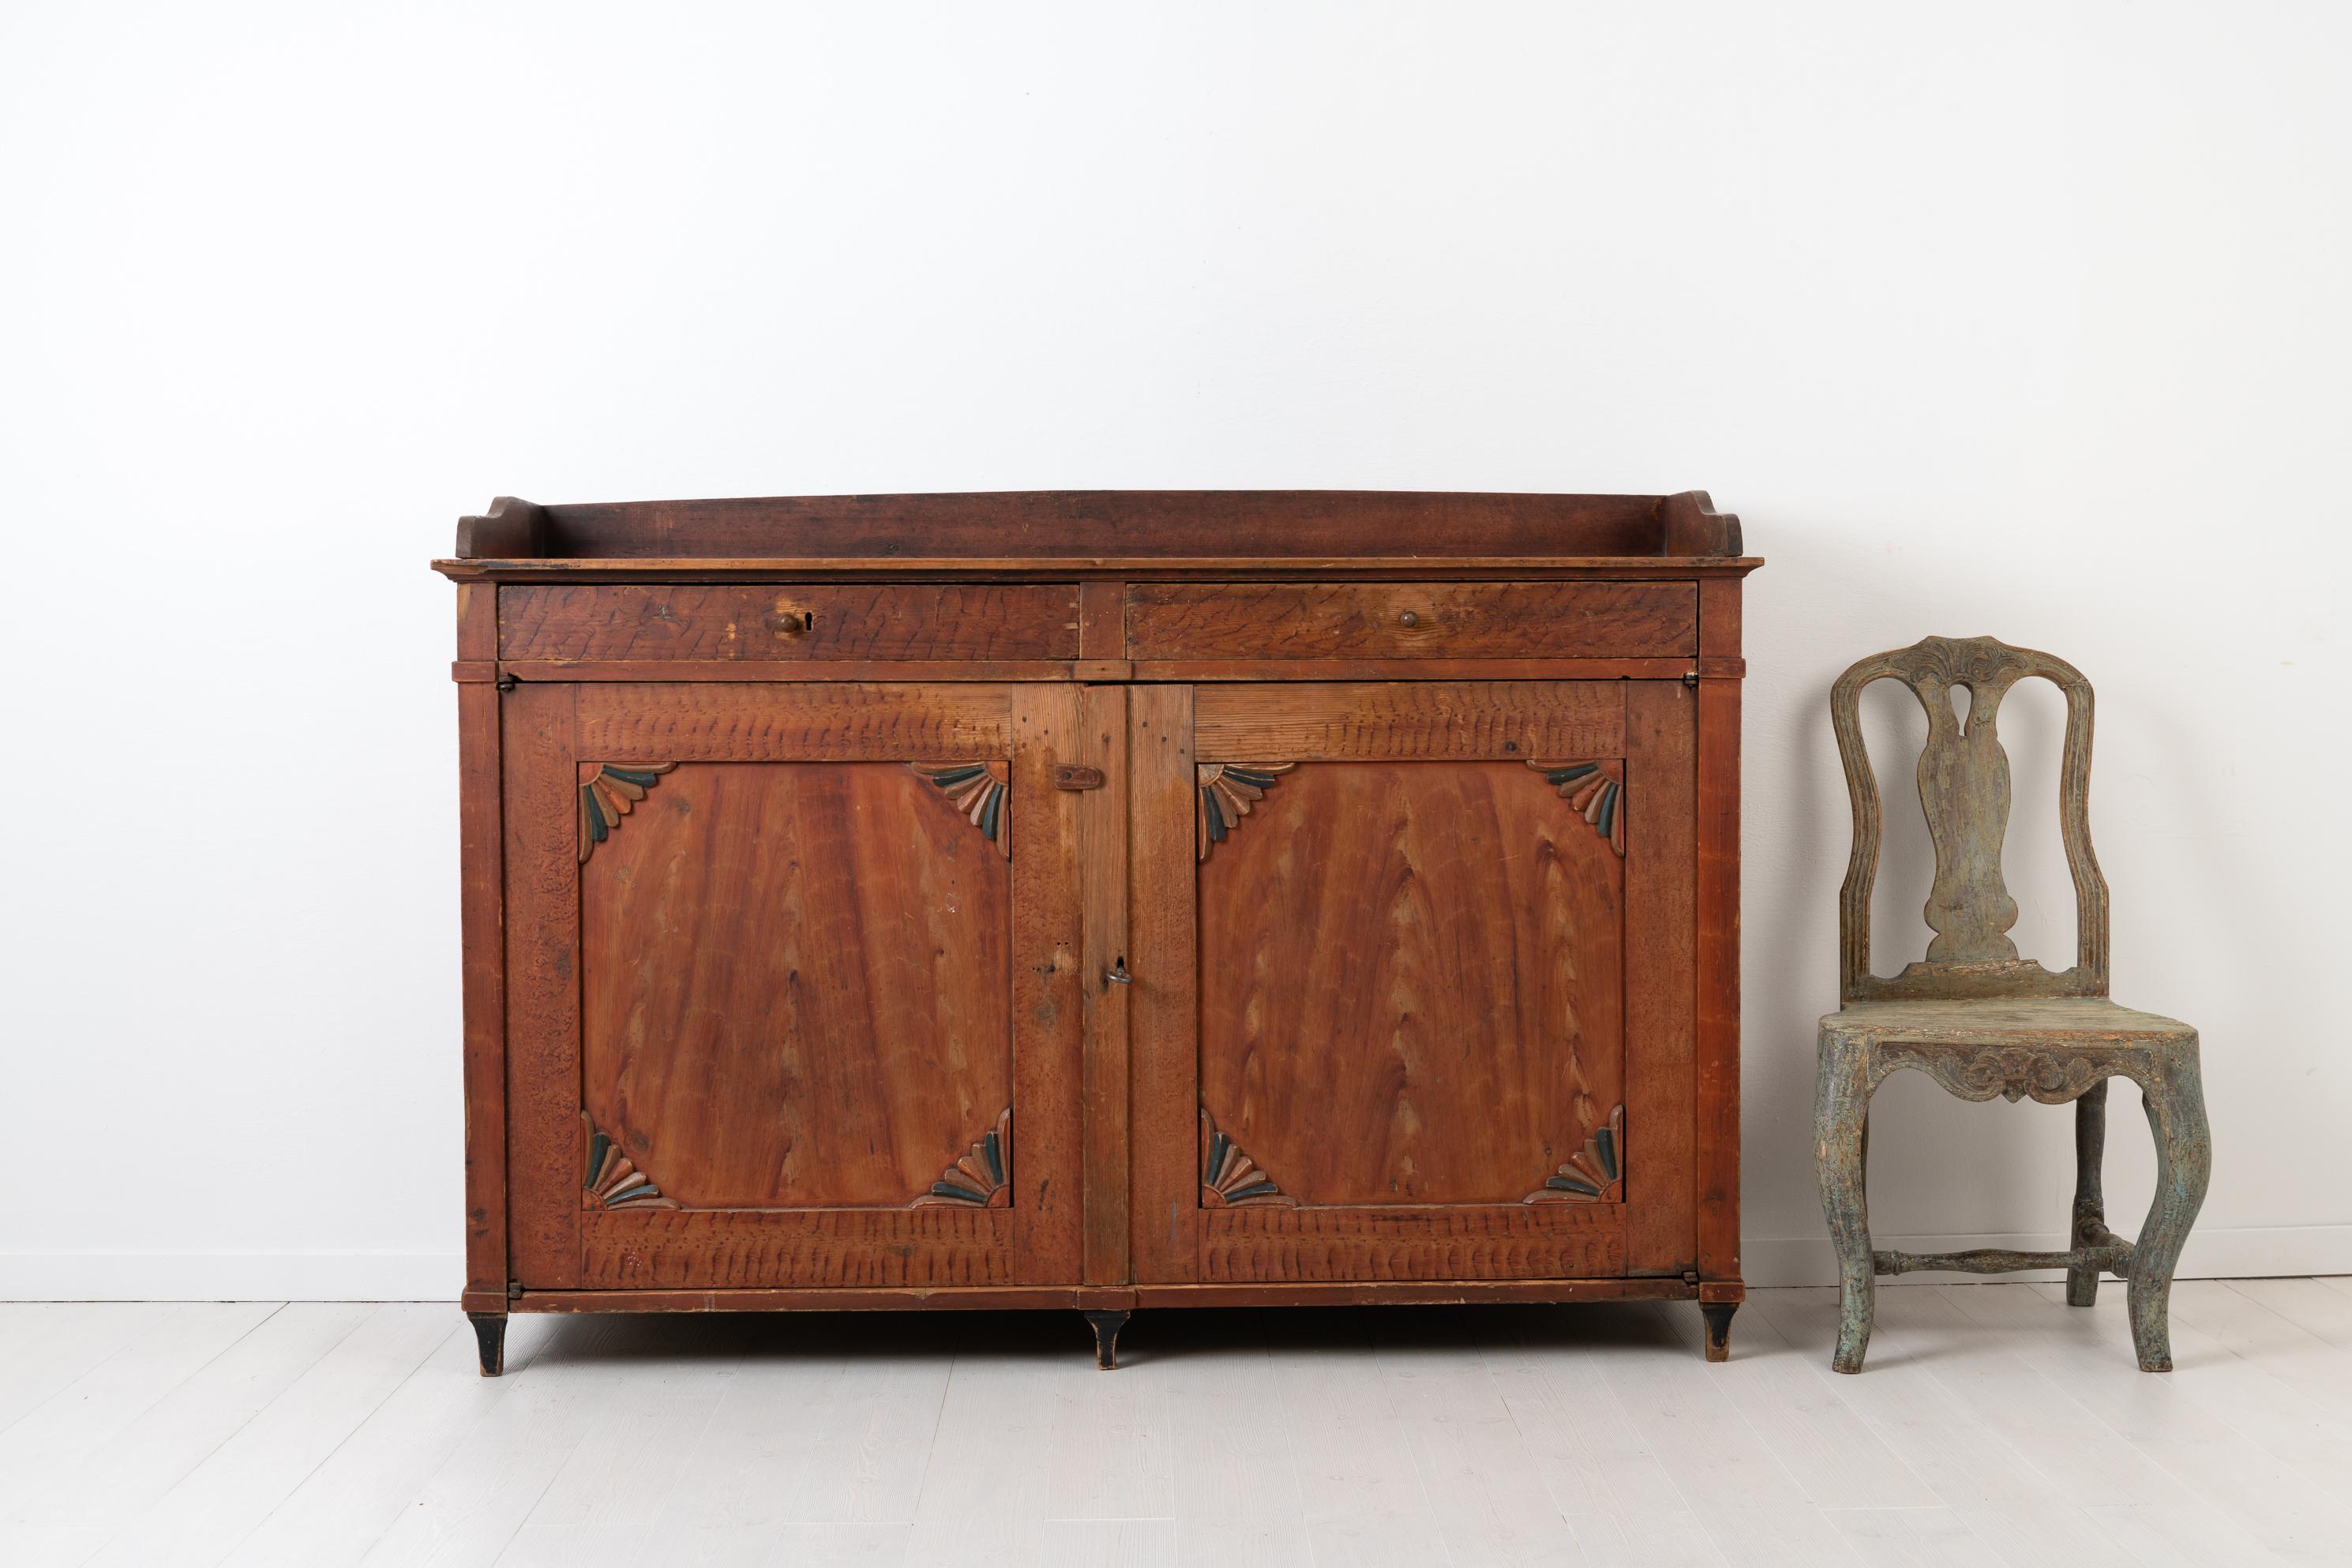 Low red Gustavian sideboard from Northern Sweden made circa 1810-1820. The sideboard is in untouched original condition with original paint from the early 1800s. It is unusually low and wide being 165 cm wide but only just over a meter tall. The